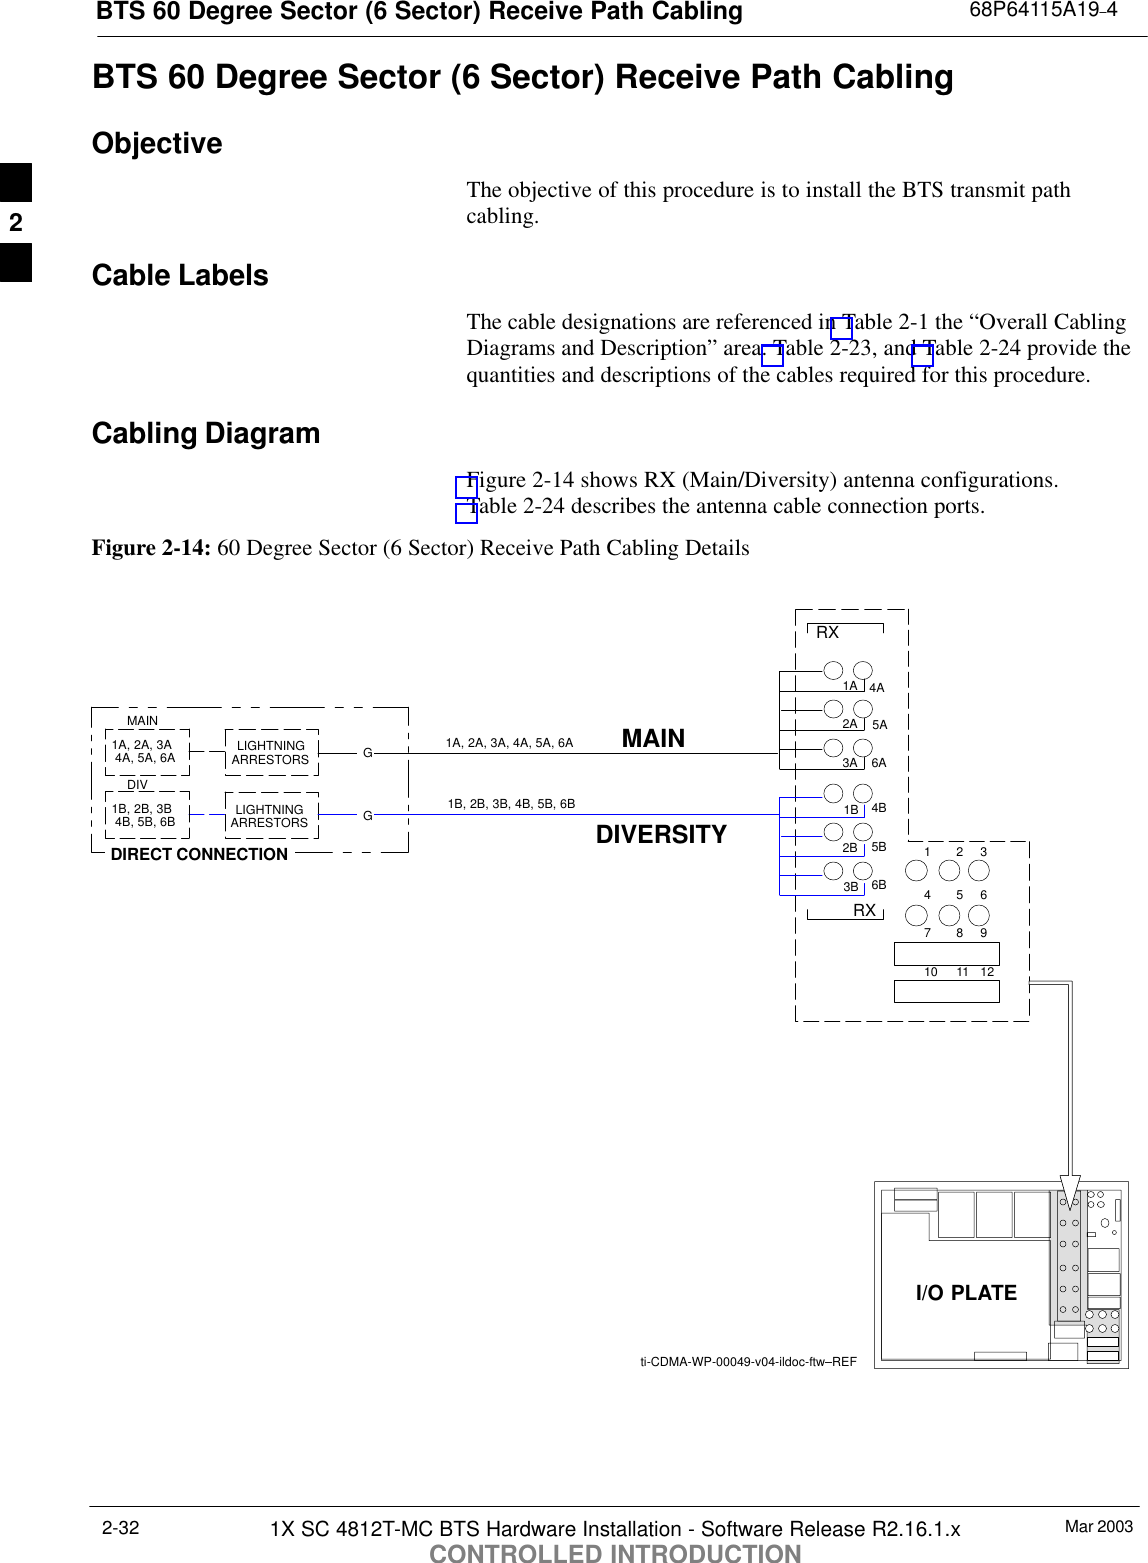 BTS 60 Degree Sector (6 Sector) Receive Path Cabling 68P64115A19–4Mar 20031X SC 4812T-MC BTS Hardware Installation - Software Release R2.16.1.xCONTROLLED INTRODUCTION2-32BTS 60 Degree Sector (6 Sector) Receive Path CablingObjectiveThe objective of this procedure is to install the BTS transmit pathcabling.Cable LabelsThe cable designations are referenced in Table 2-1 the “Overall CablingDiagrams and Description” area. Table 2-23, and Table 2-24 provide thequantities and descriptions of the cables required for this procedure.Cabling DiagramFigure 2-14 shows RX (Main/Diversity) antenna configurations.Table 2-24 describes the antenna cable connection ports.Figure 2-14: 60 Degree Sector (6 Sector) Receive Path Cabling DetailsDIRECT CONNECTIONLIGHTNINGARRESTORSLIGHTNINGARRESTORS1A, 2A, 3A, 4A, 5A, 6A1B, 2B, 3B, 4B, 5B, 6B1A, 2A, 3A 4A, 5A, 6AMAINDIV1B, 2B, 3B 4B, 5B, 6Bti-CDMA-WP-00049-v04-ildoc-ftw–REF3A2A6A5A4A3B2B1B6B5B4B1A12345678910 11 12RXRXI/O PLATEGGMAINDIVERSITY2